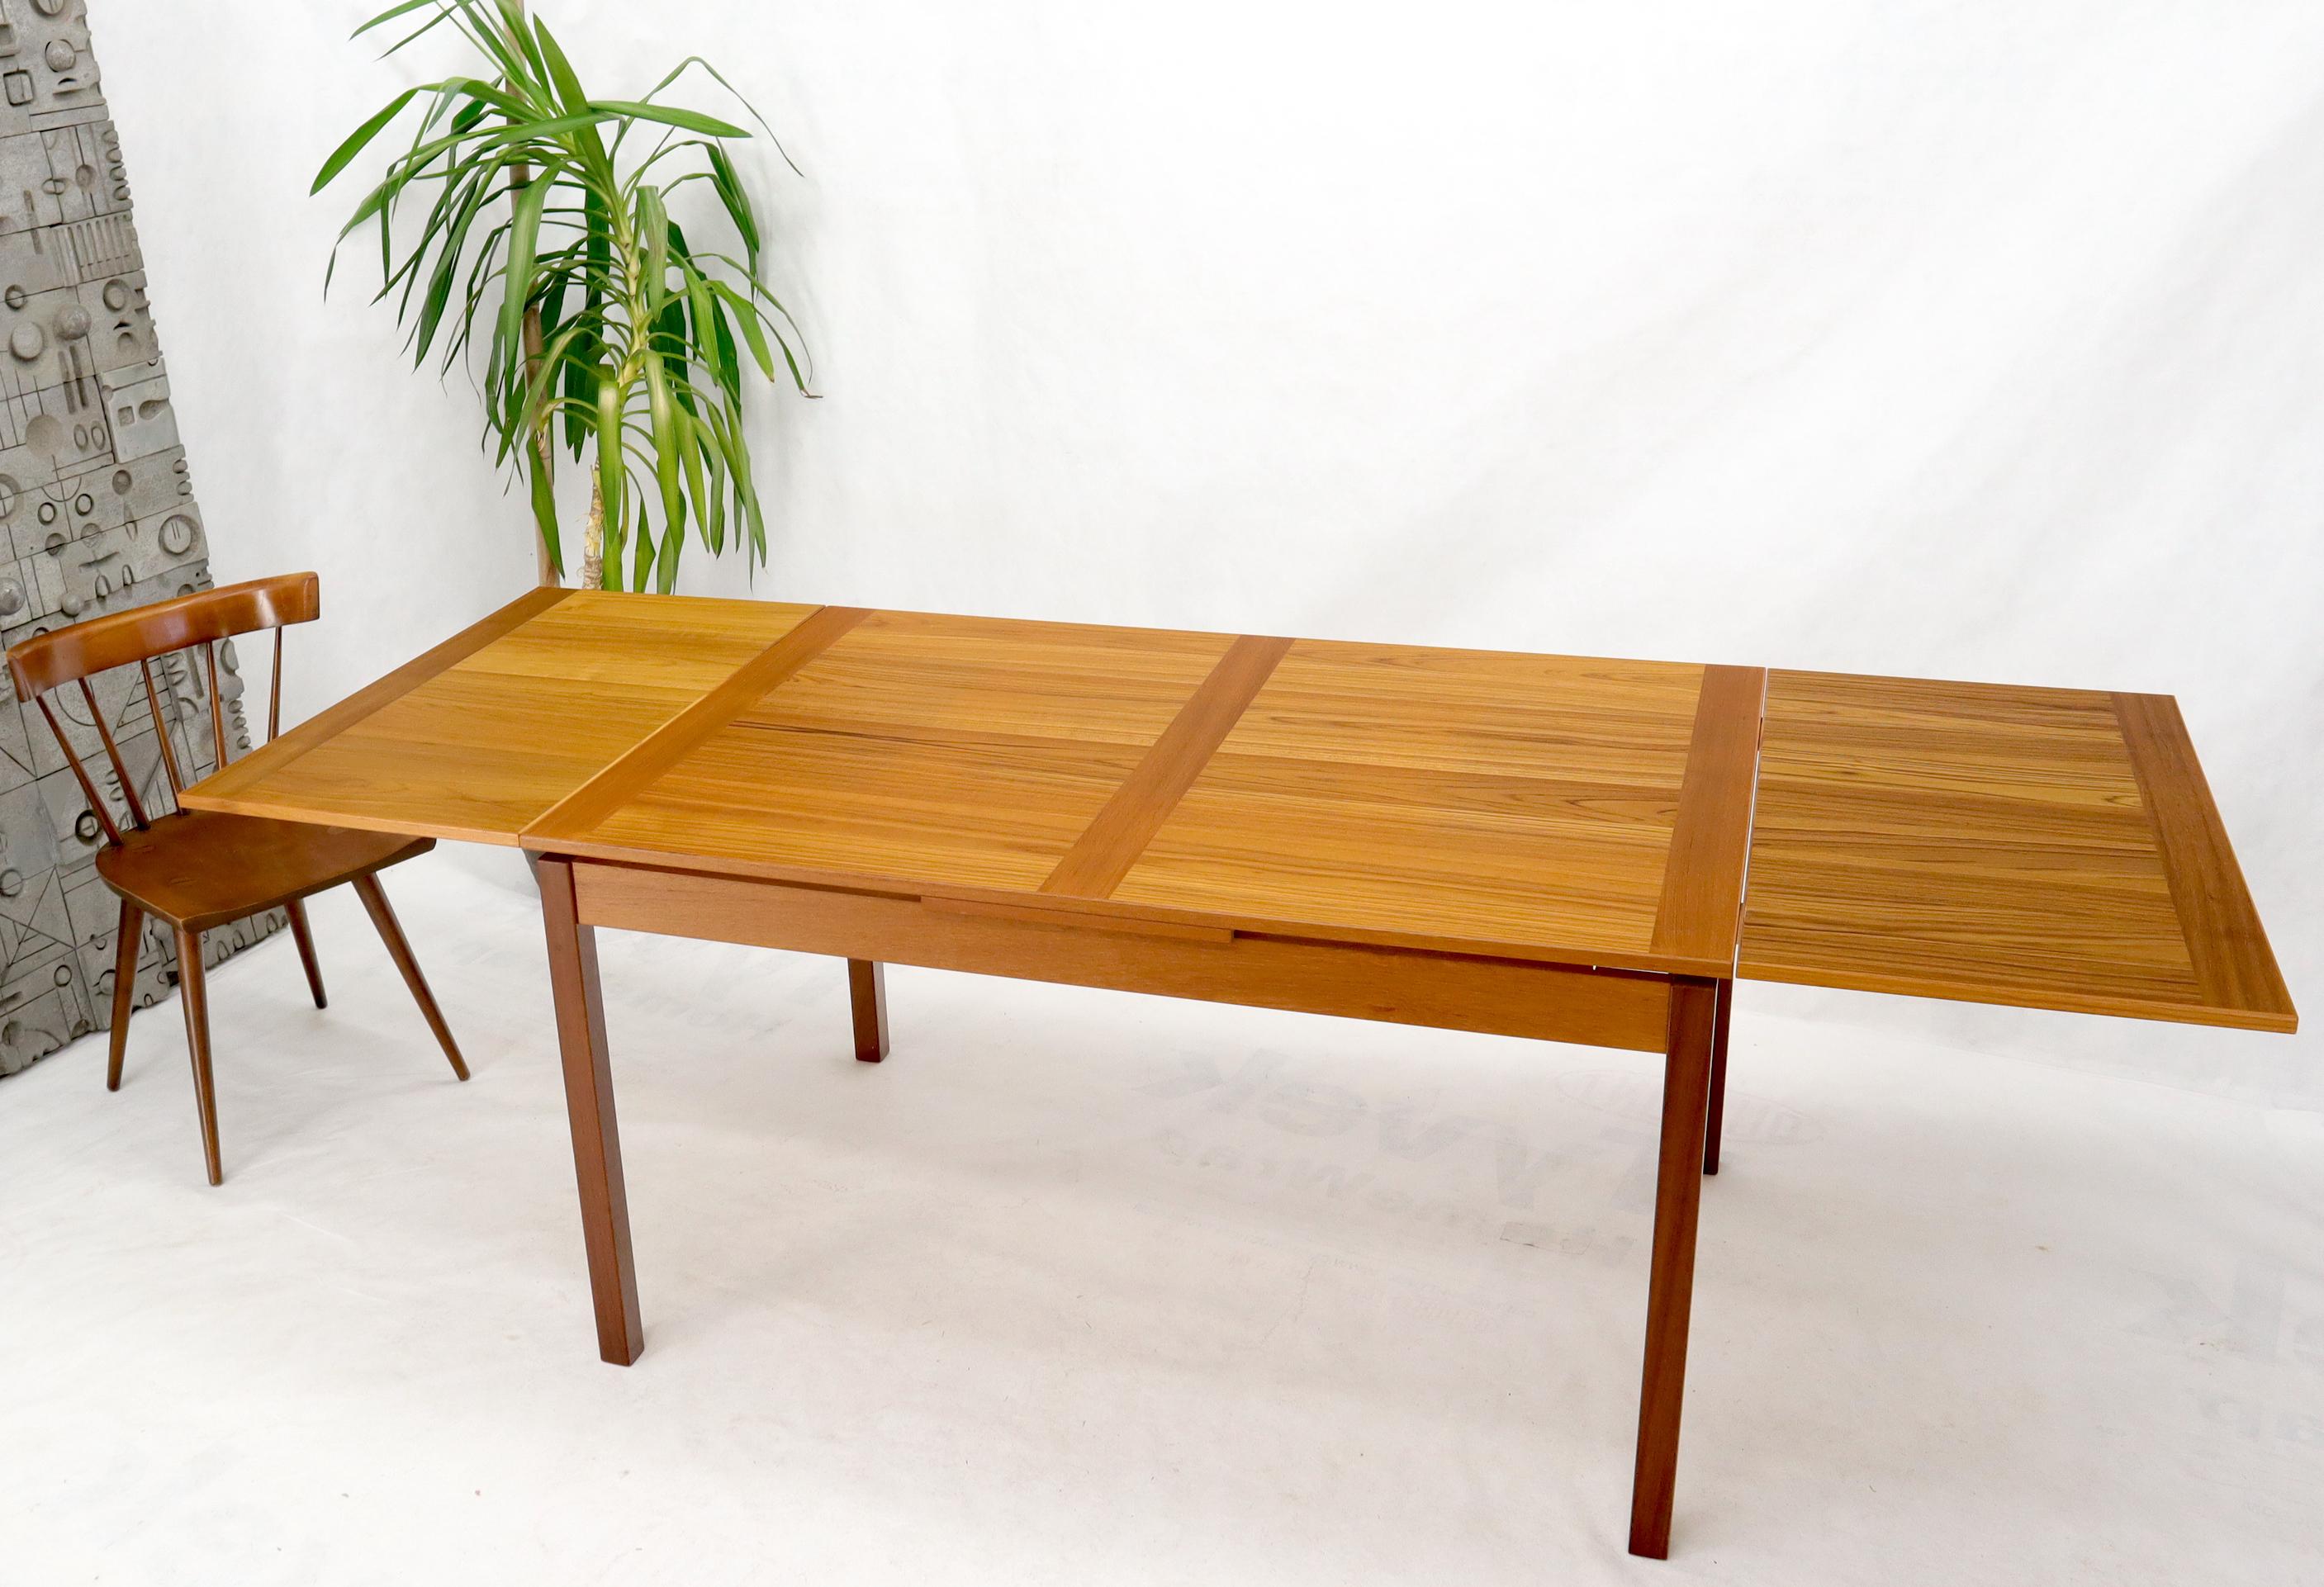 Classic Danish Mid-Century Modern rectangular refectory dining table. Made in Denmark. Measures: 2 x 20